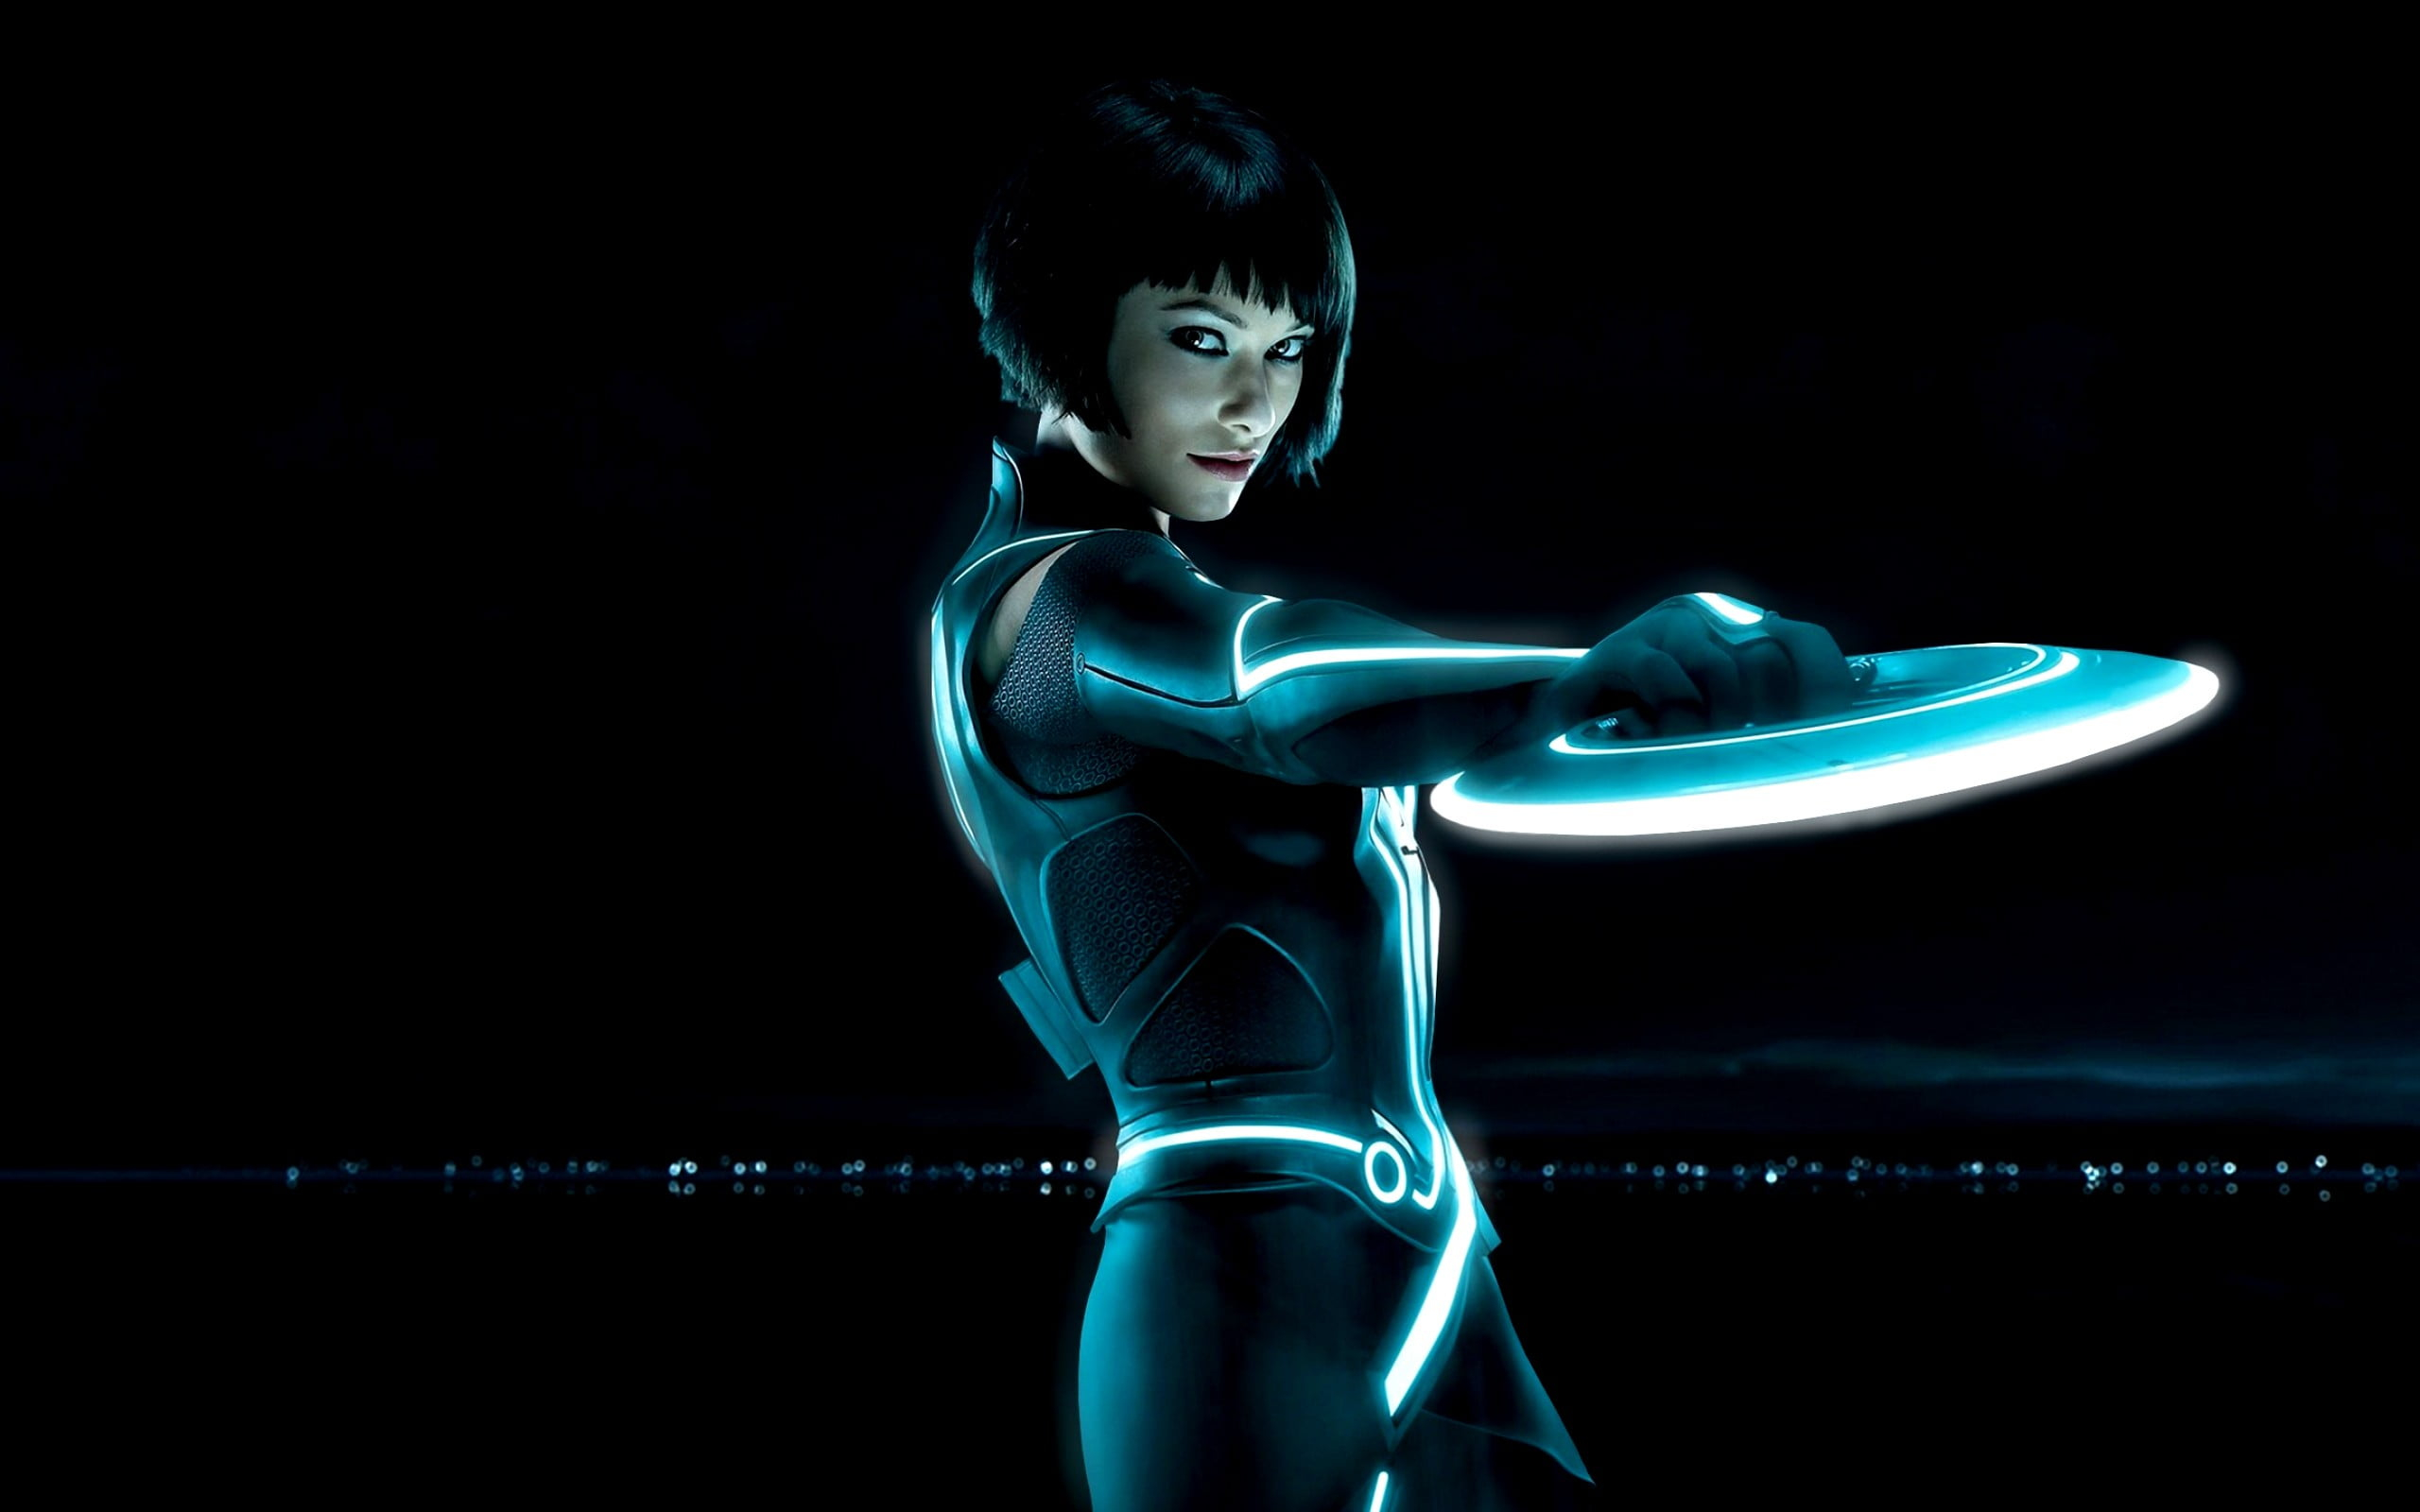 Tron legacy olivia wilde wallpapers and backgrounds k hd dual screen